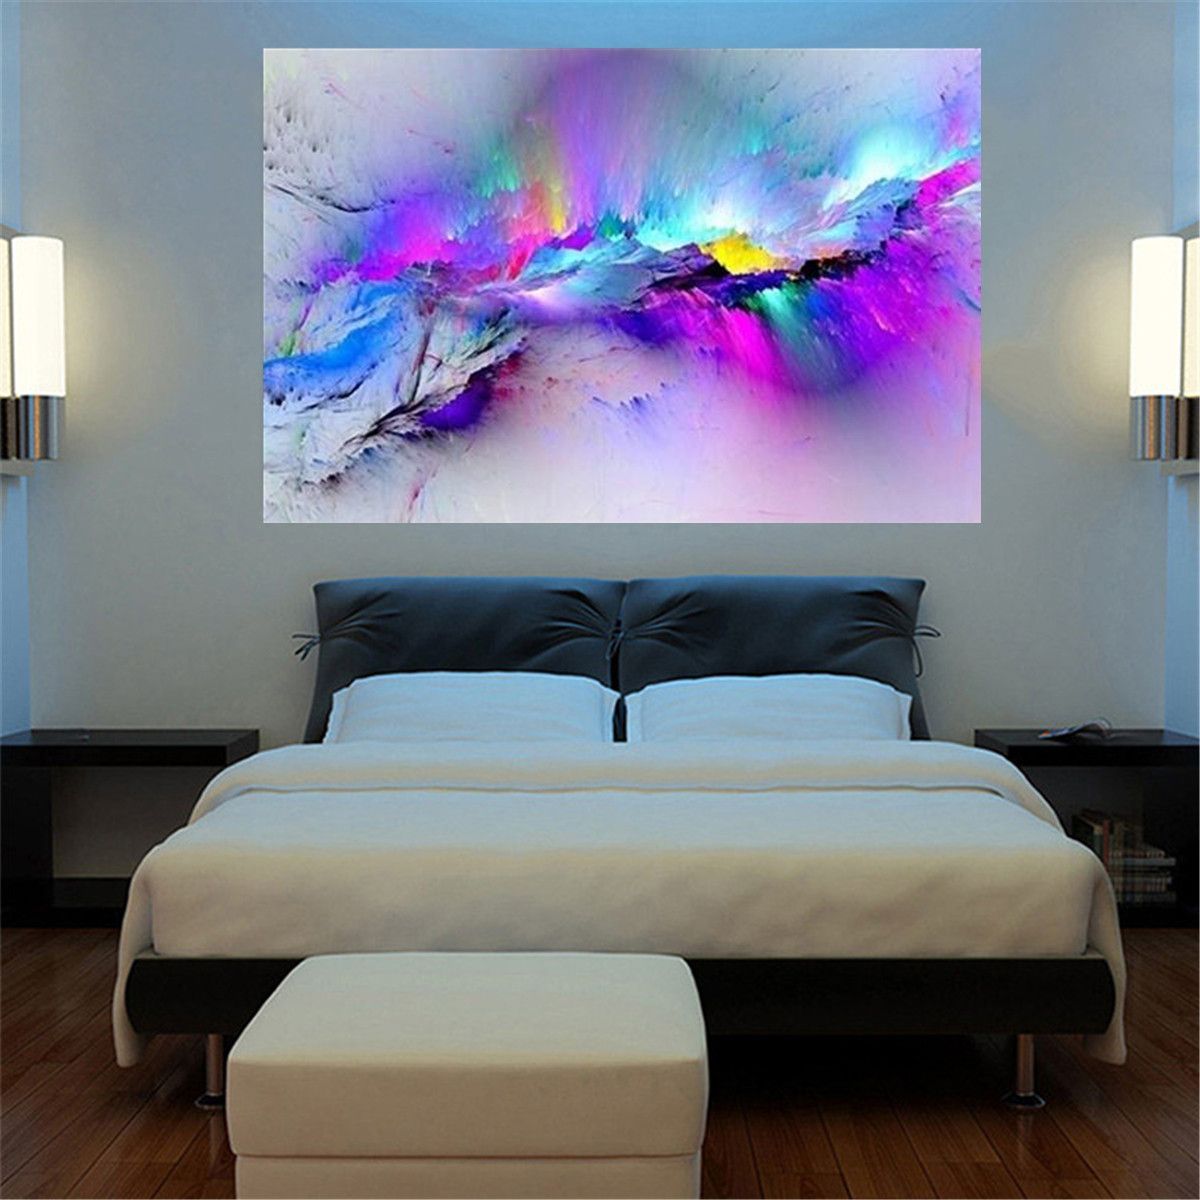 Abstract-Clouds-Colorful-Canvas-Painting-Modern-Wall-Pictures-For-Living-Room-Home-Decor-Paper-1446224